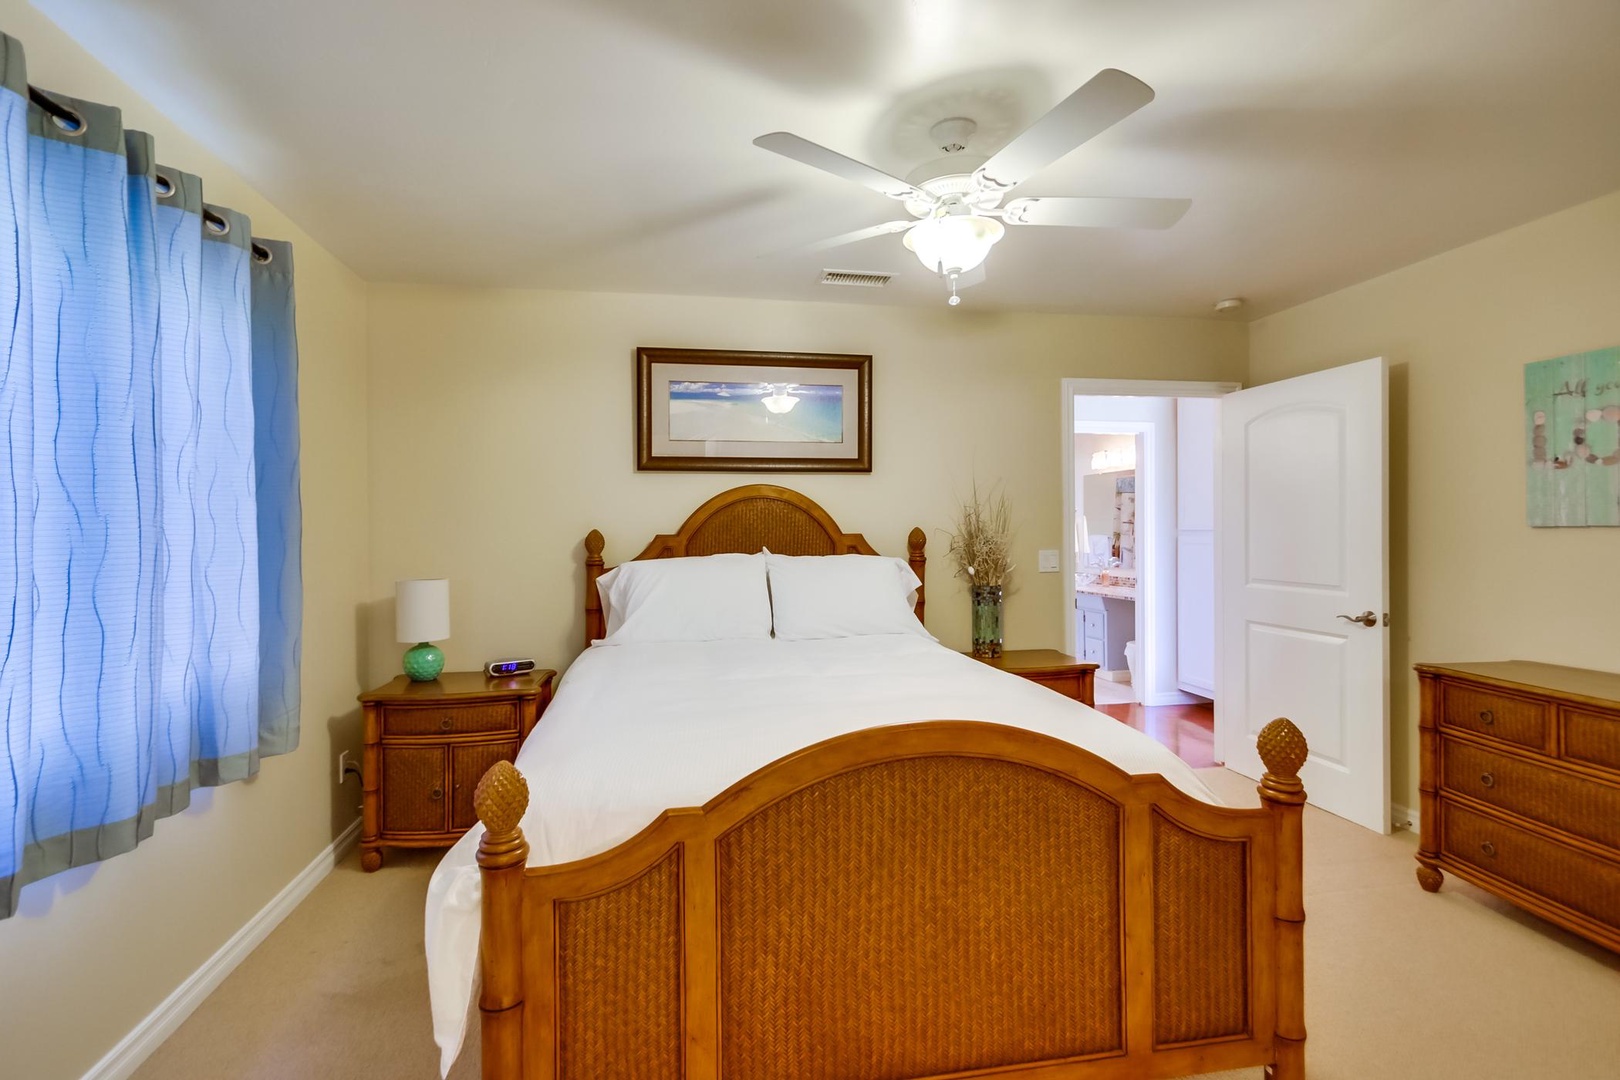 Bedroom 1 Suite with ceiling fan